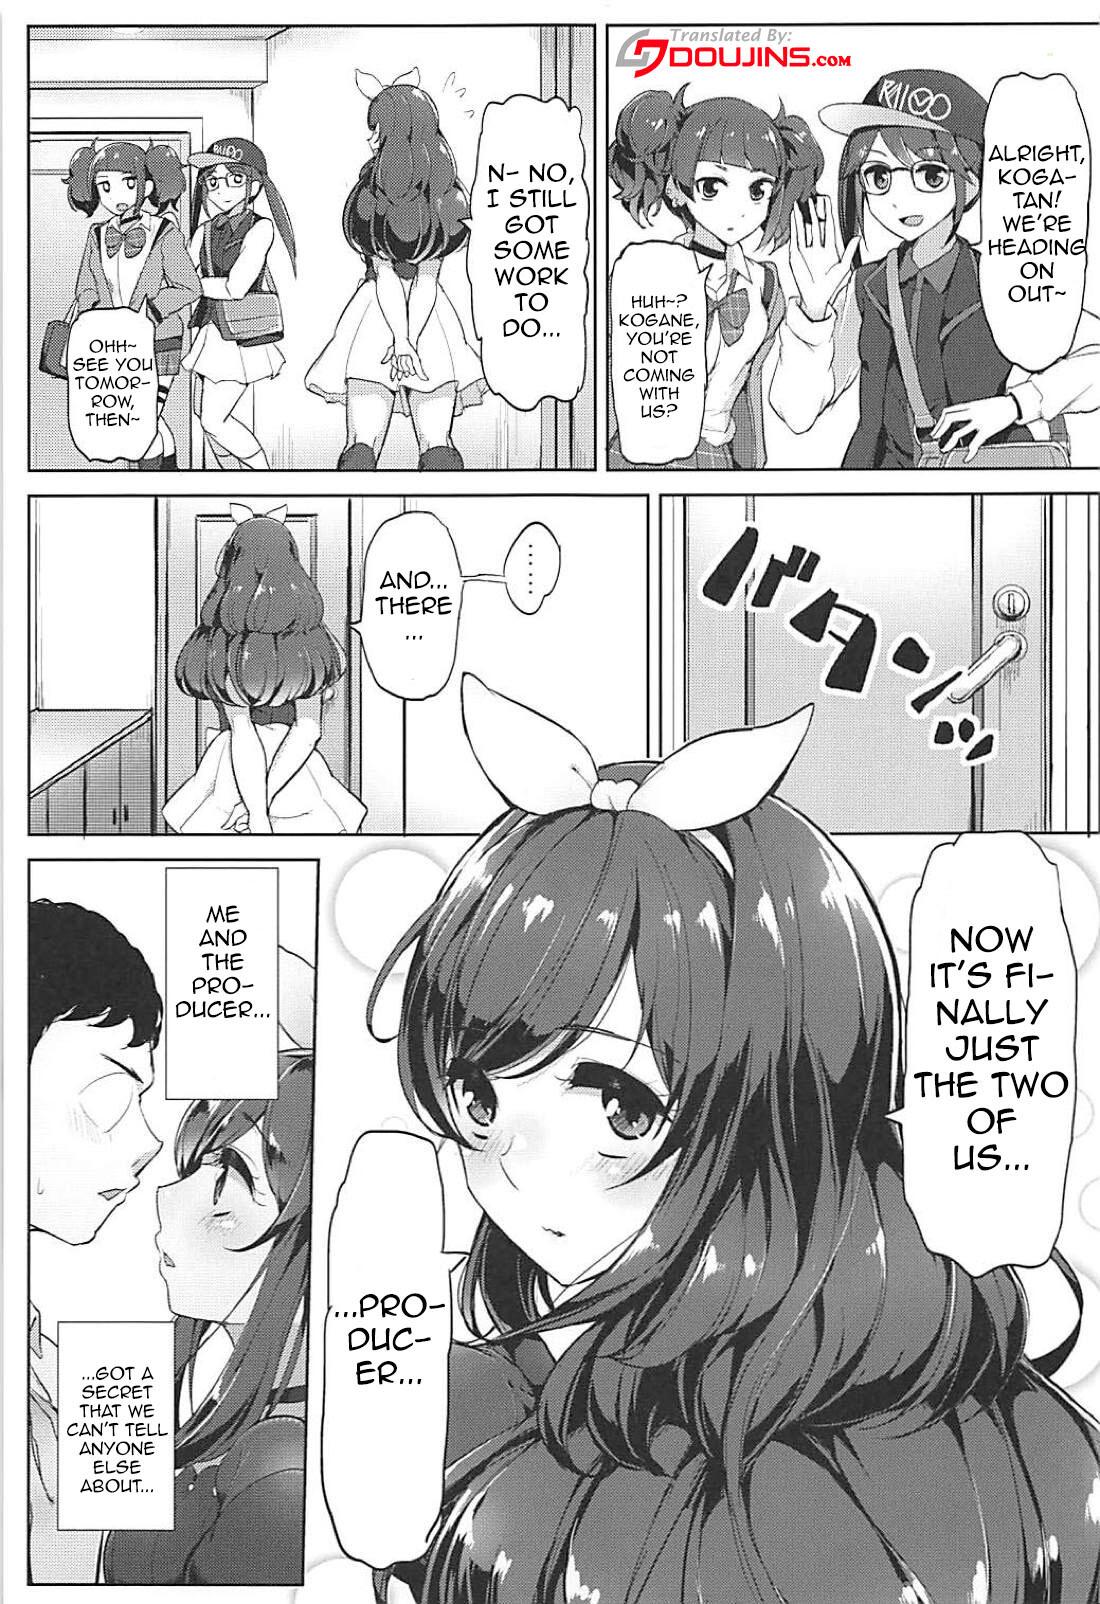 Groupfuck P e no Suki wa Tomeraren bai - When I Just Can't Stop Loving The Producer - The idolmaster One - Page 2